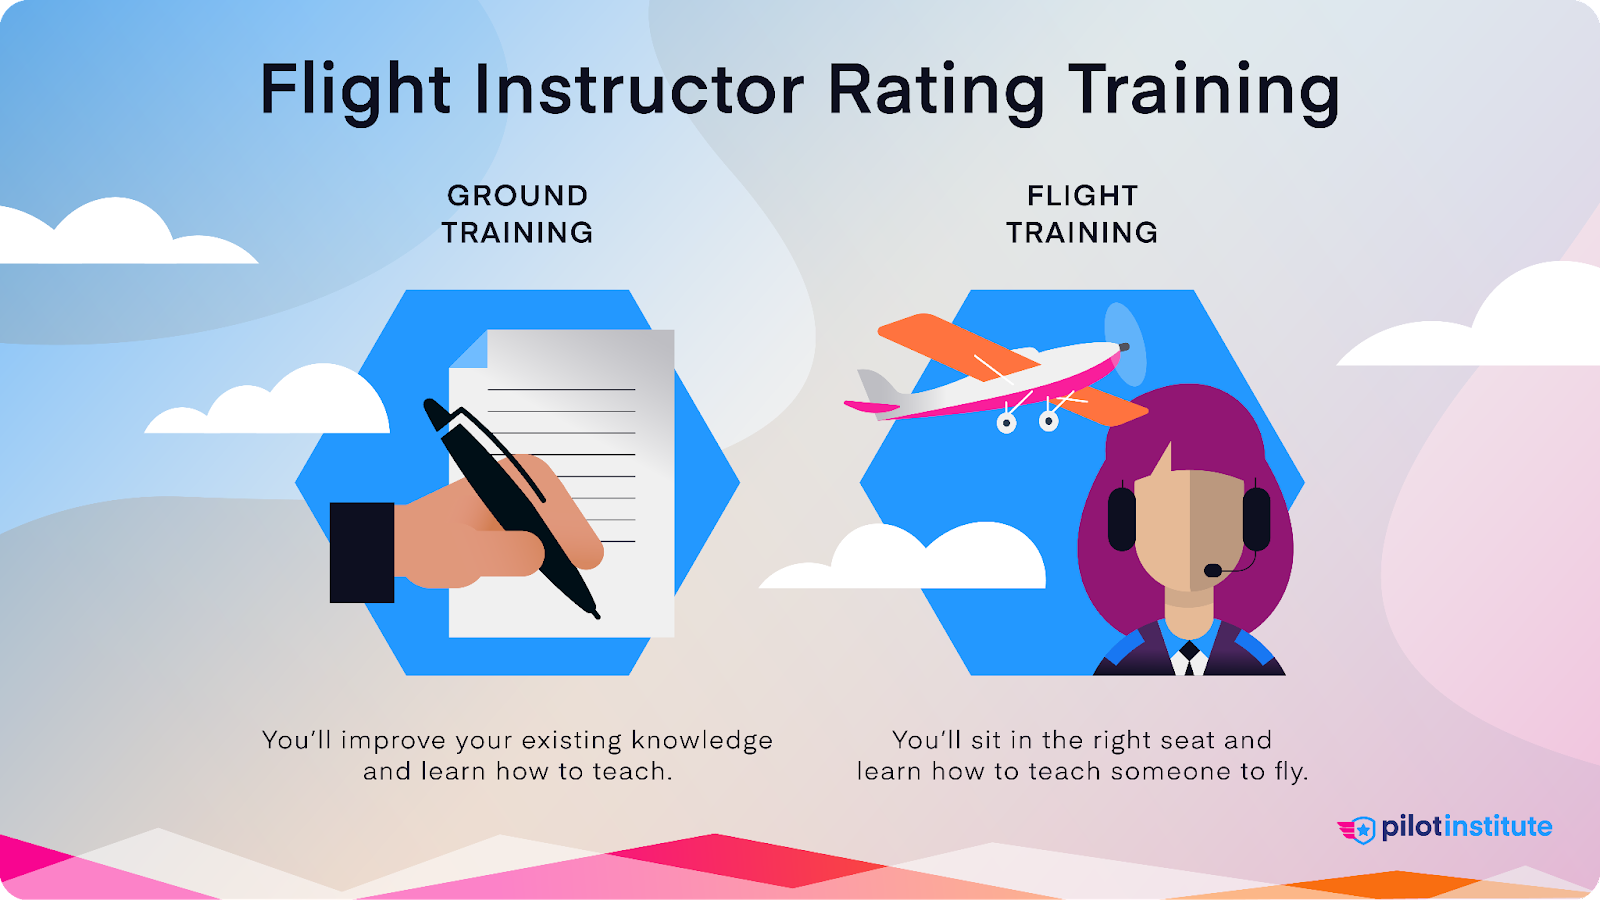 A graphic depicting the two parts of. flight instructor rating training.